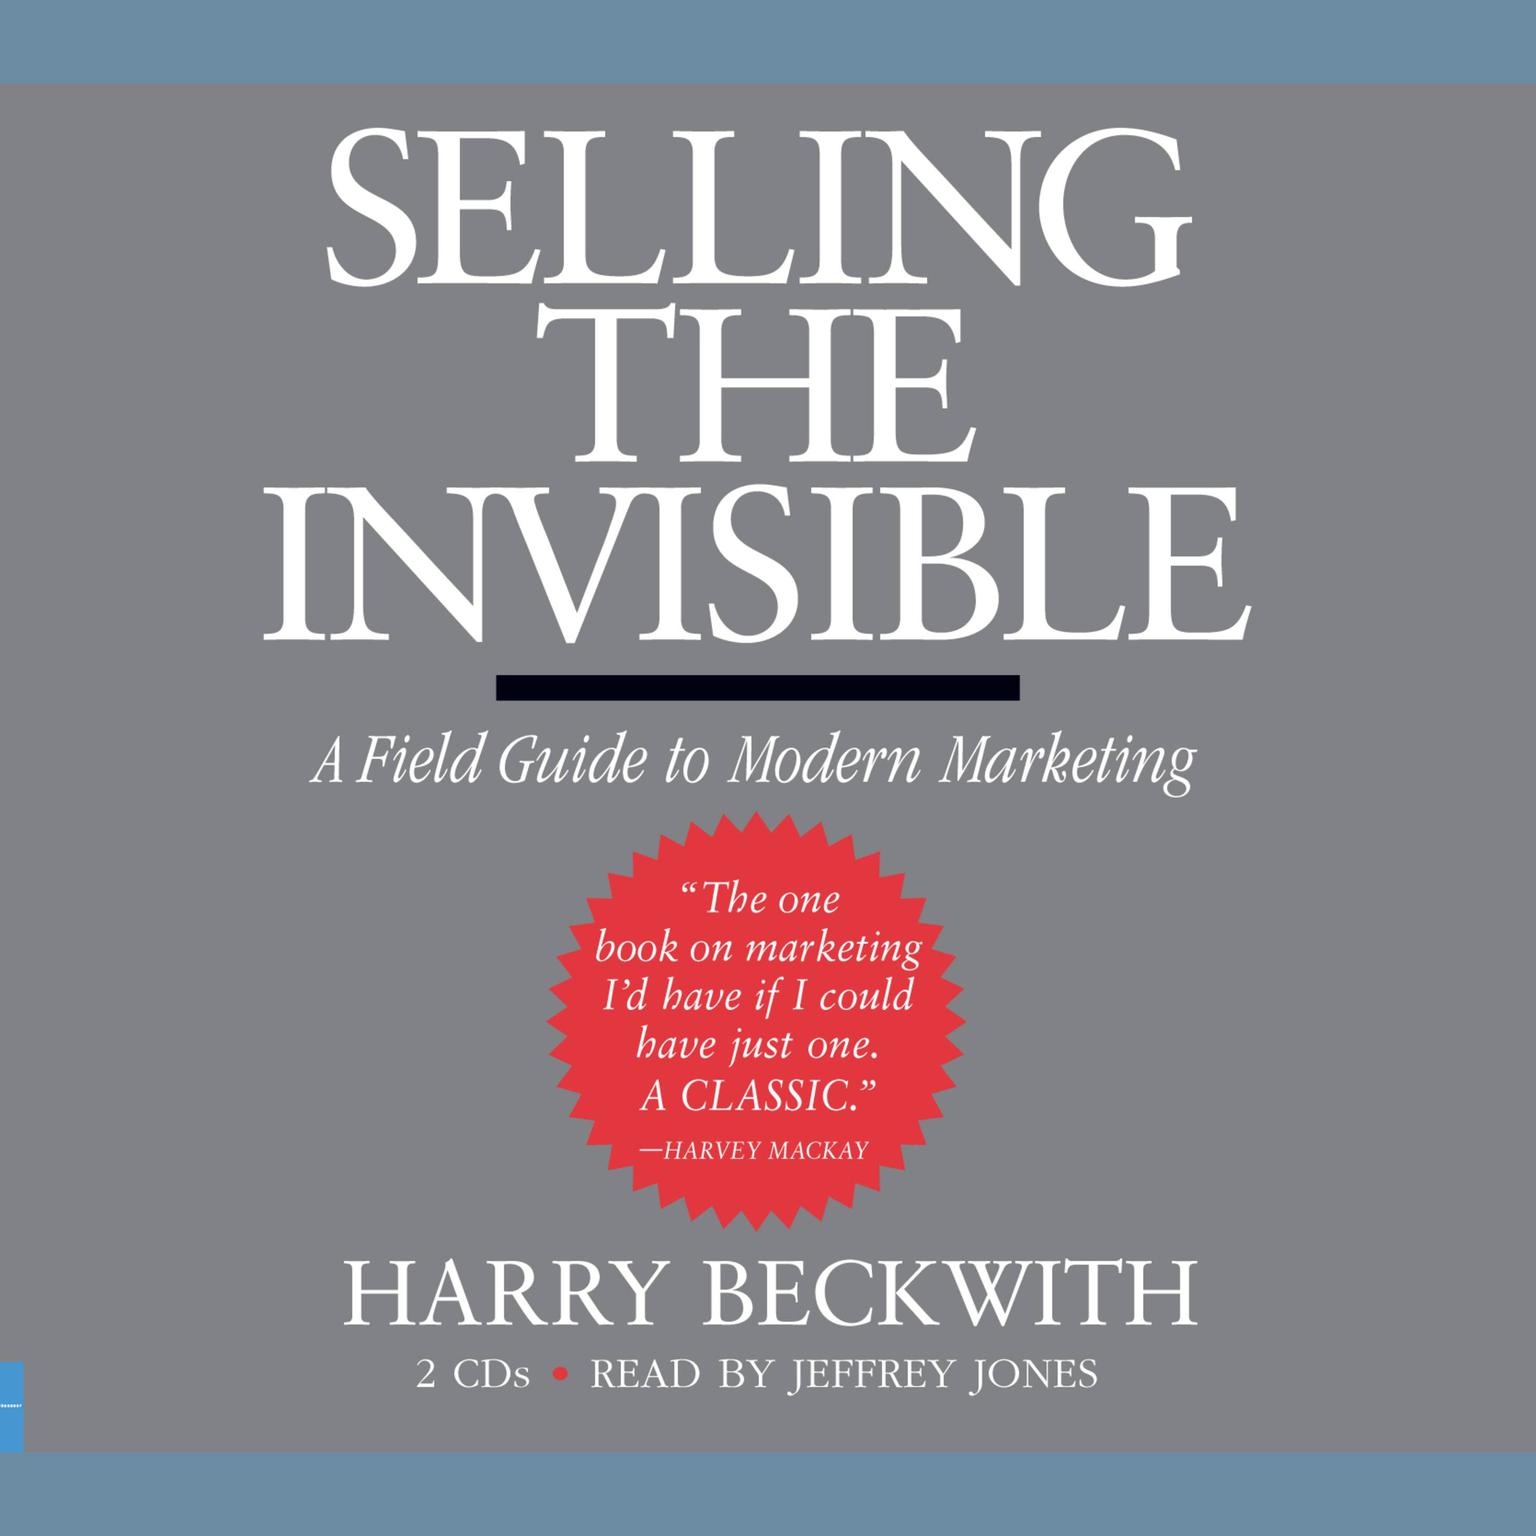 Selling the Invisible (Abridged): A Field Guide to Modern Marketing Audiobook, by Harry Beckwith